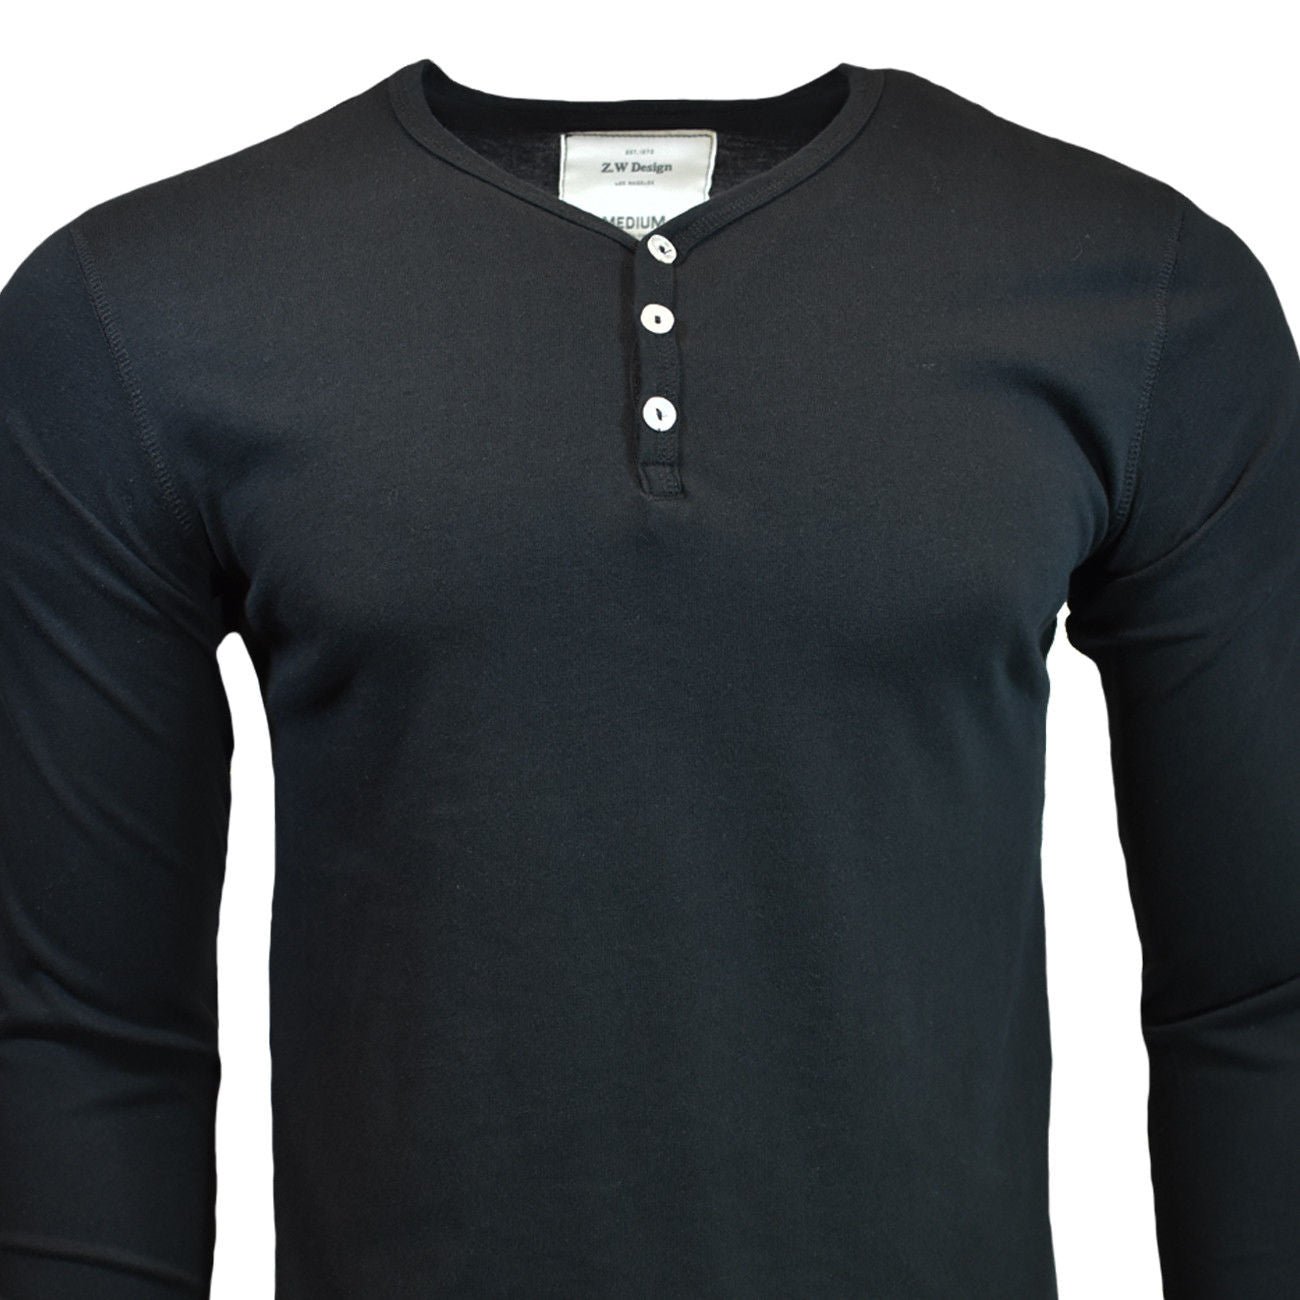 Henley Shirt Mens Long Sleeve Button Thermal Slim Fit Pullover BLACK NEW